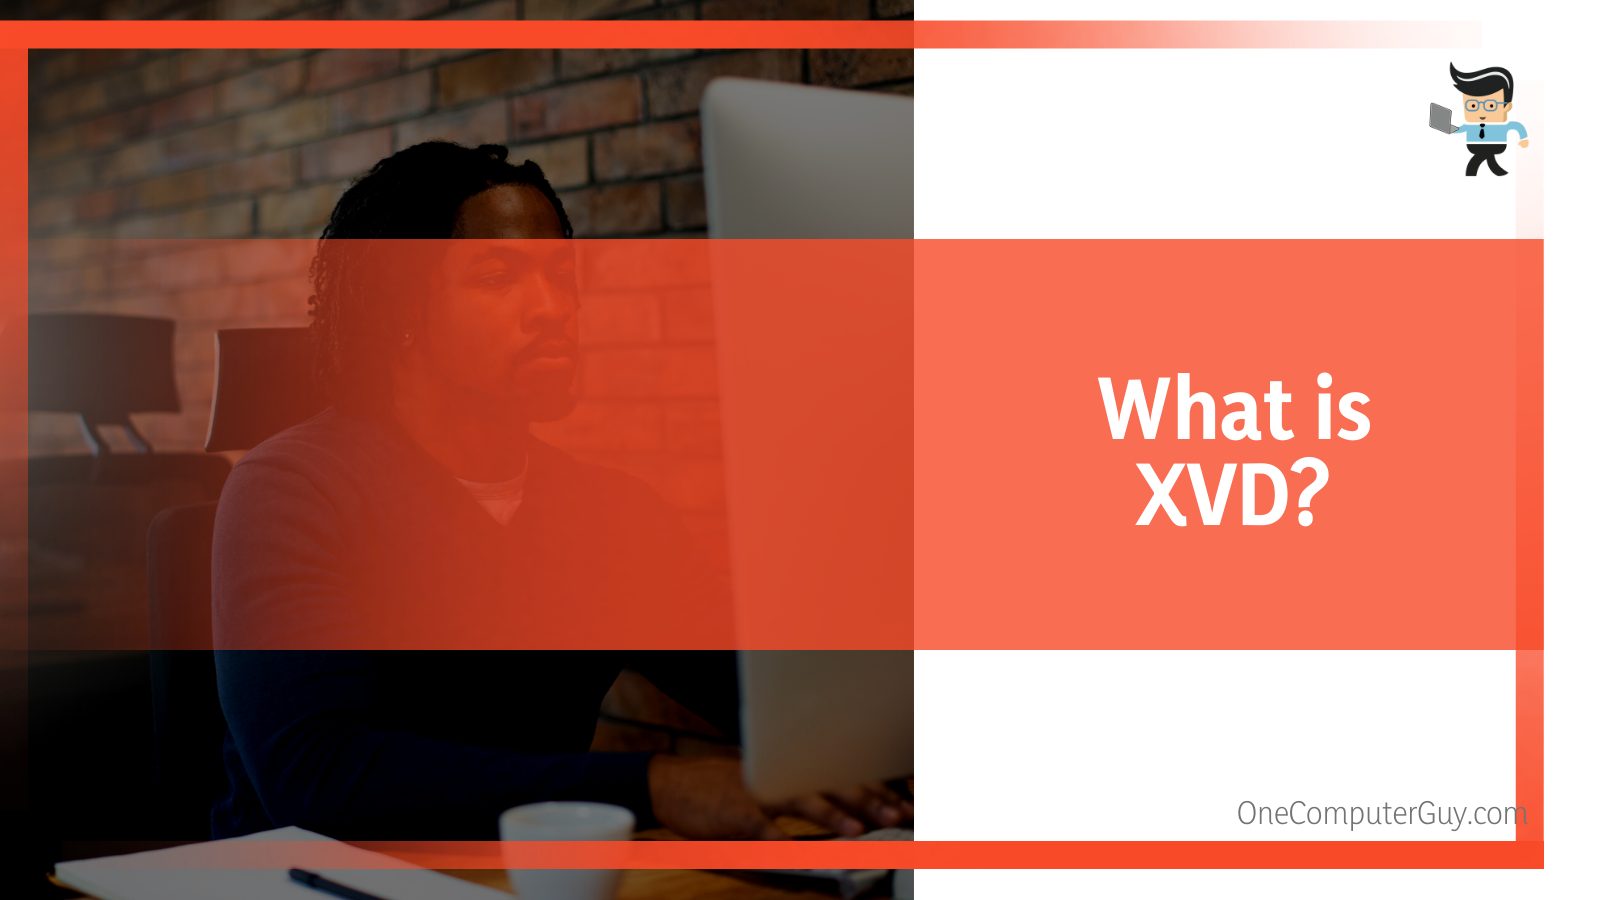 What is XVD